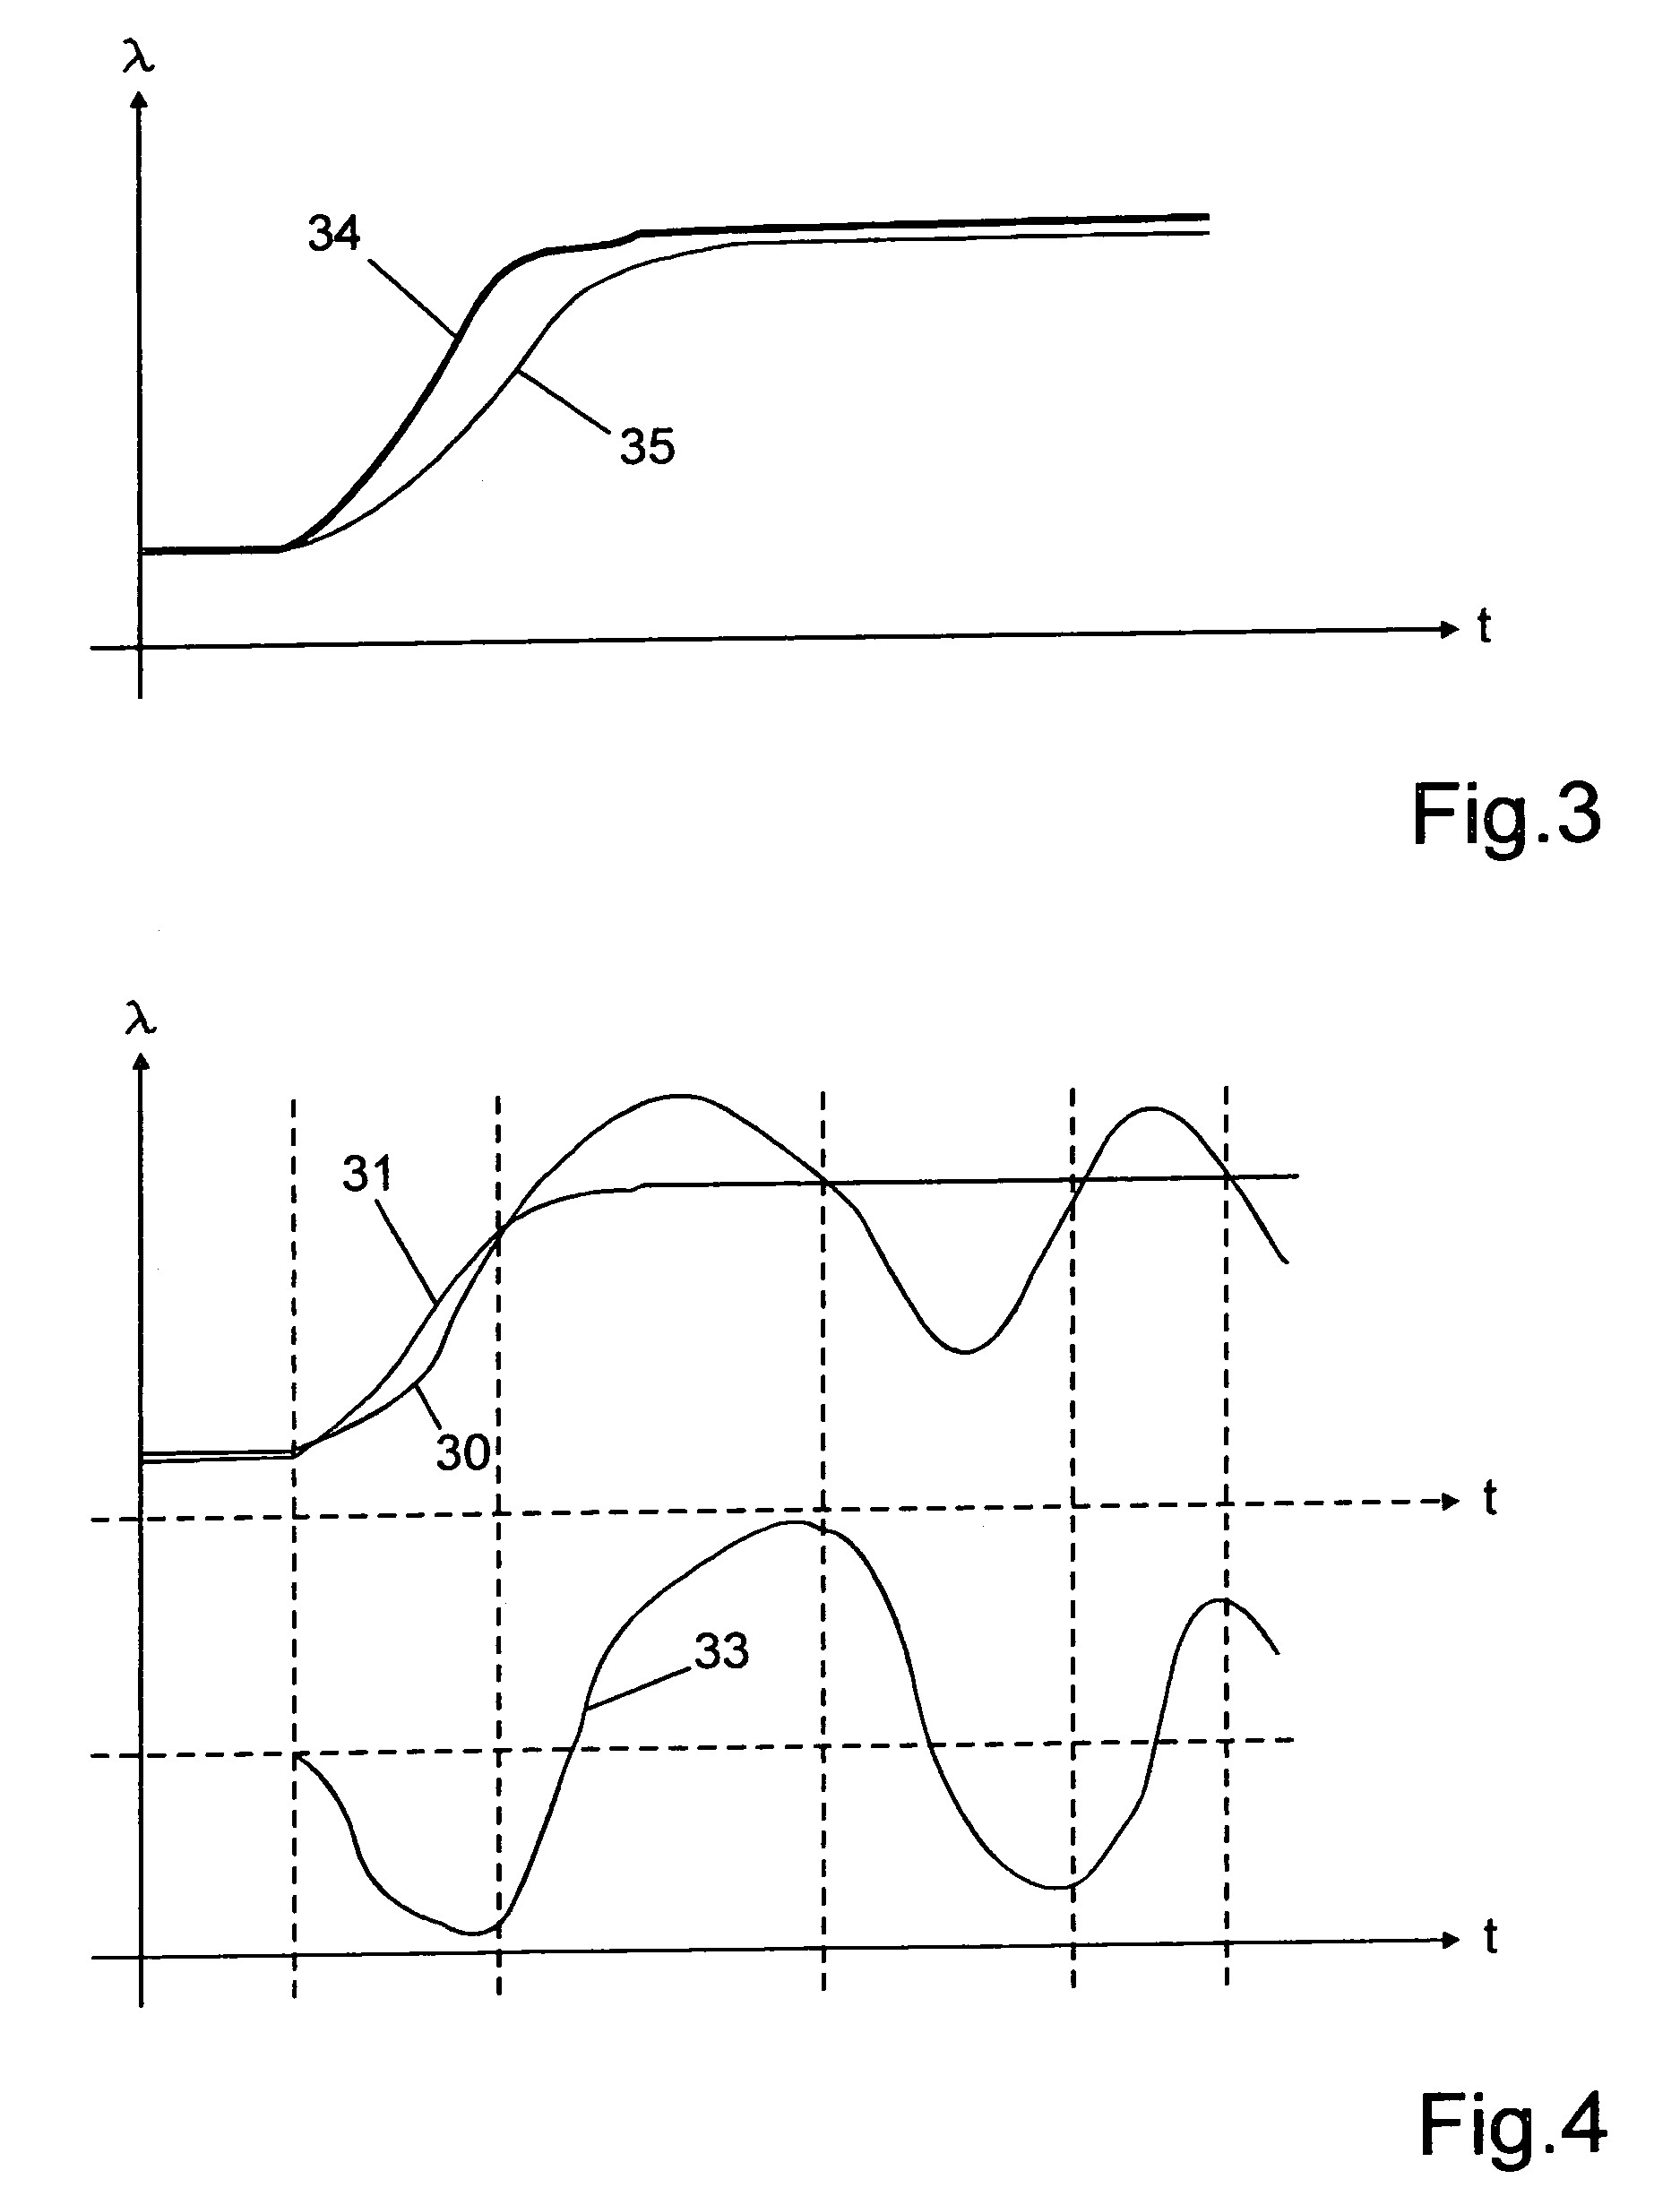 Method for dynamic diagnosis of an exhaust gas analyzer probe